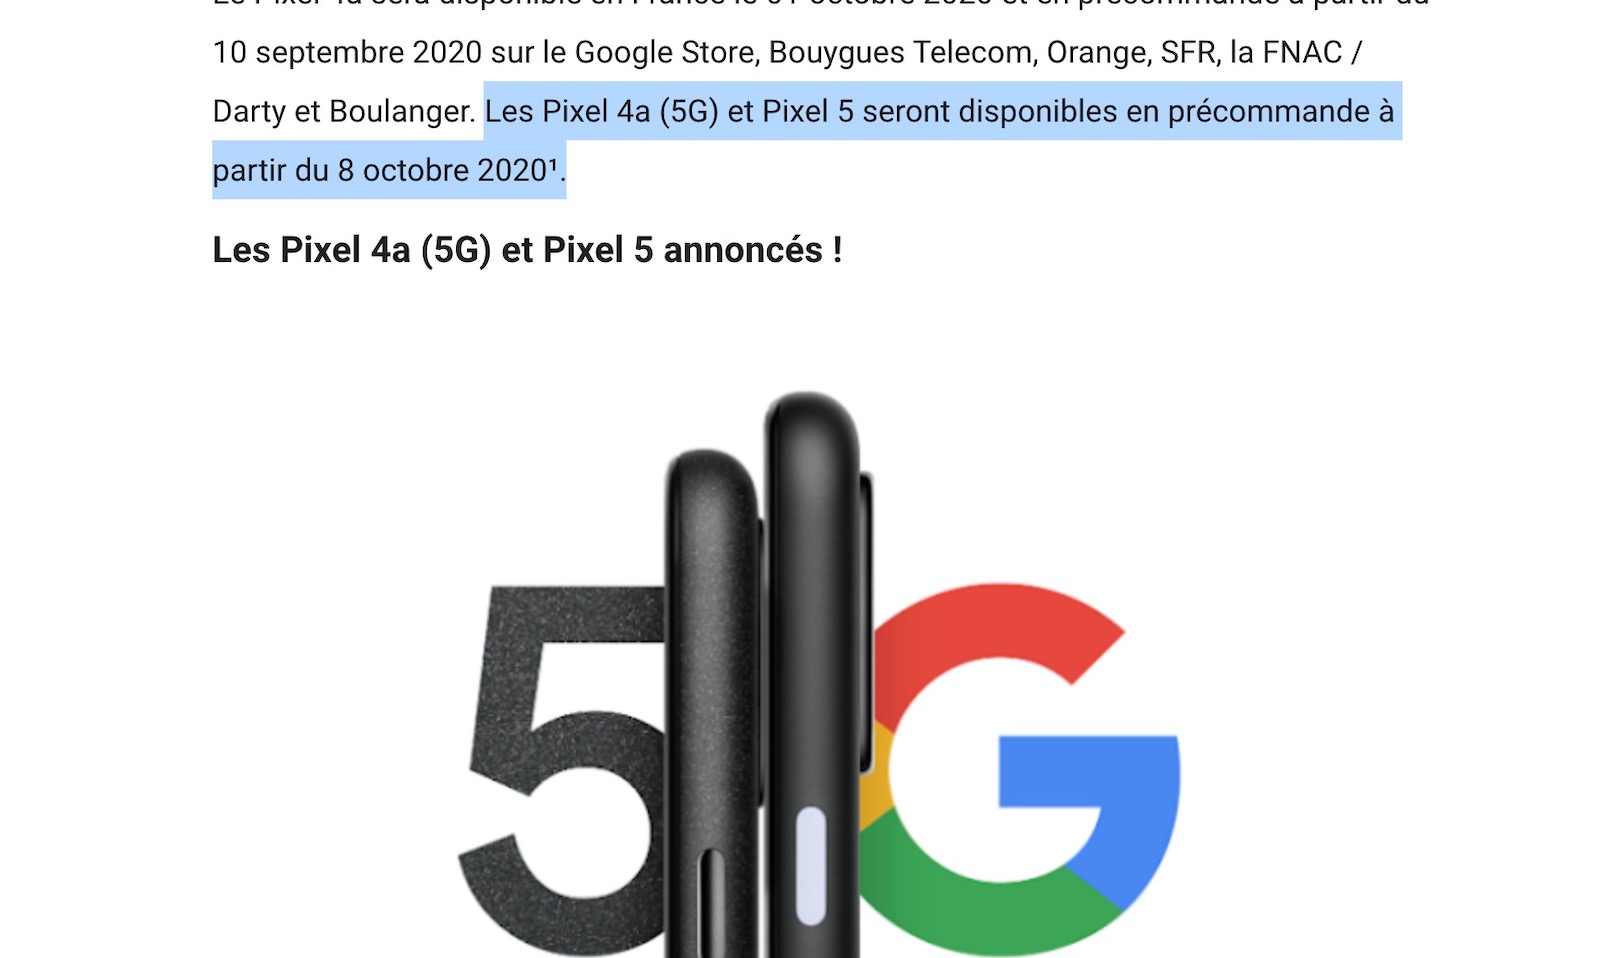 Google pixel4a 5g and 5 release dates